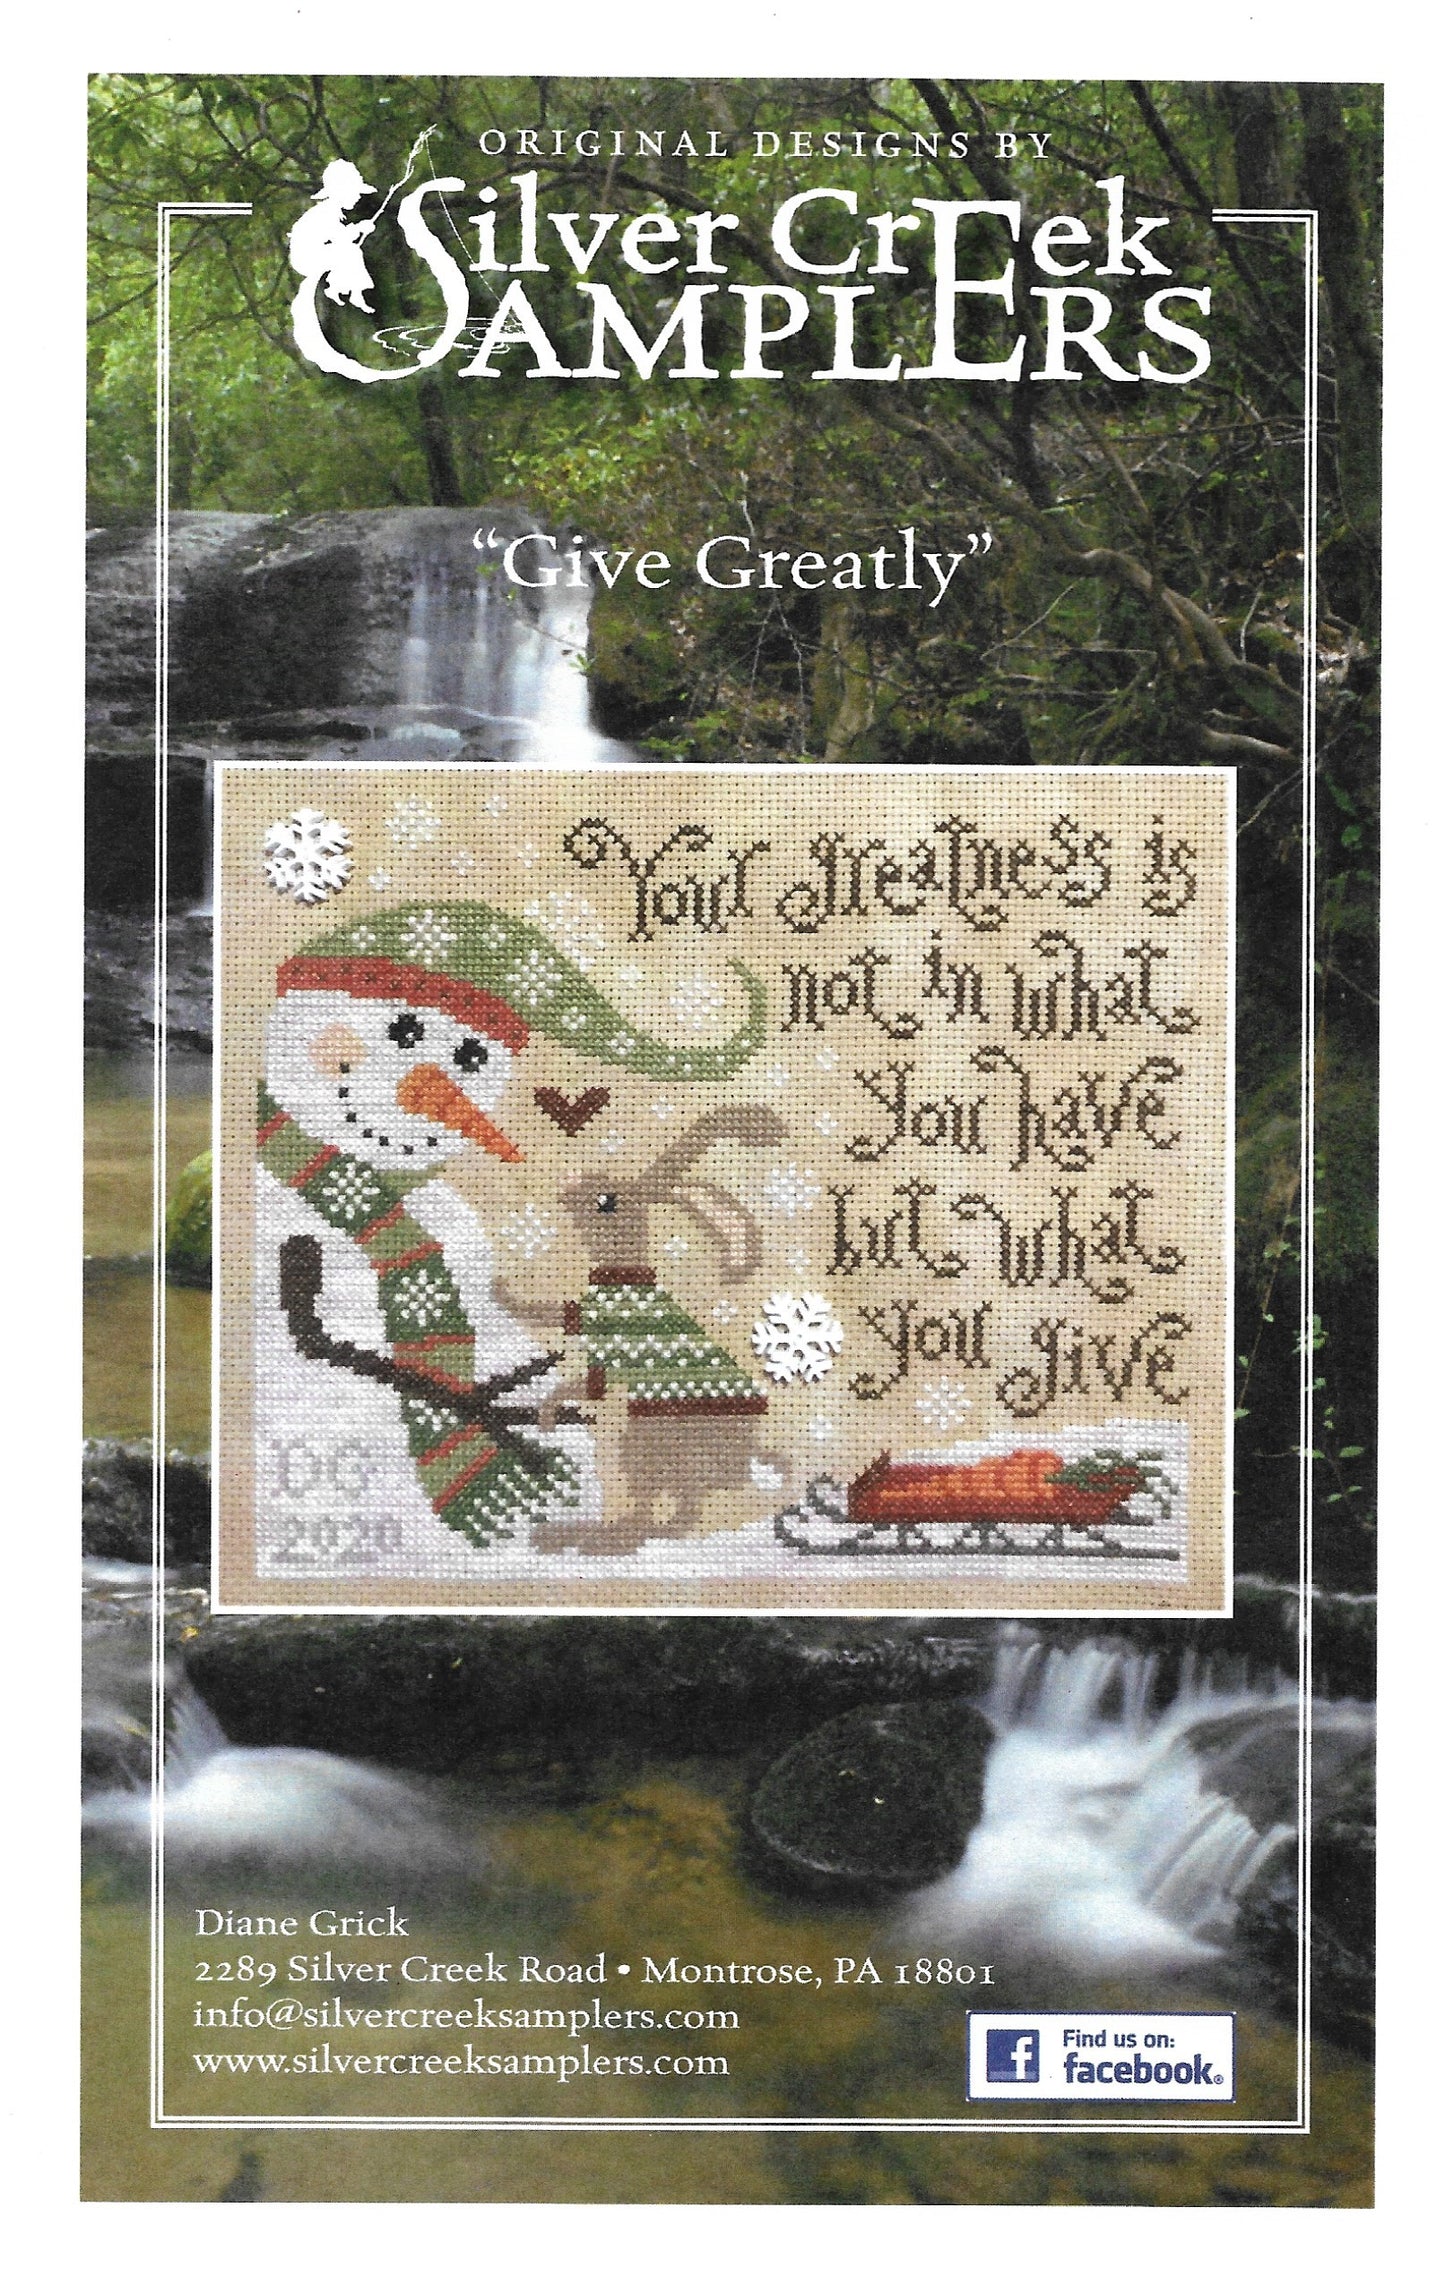 Silver Creek Samplers - Give Greatly